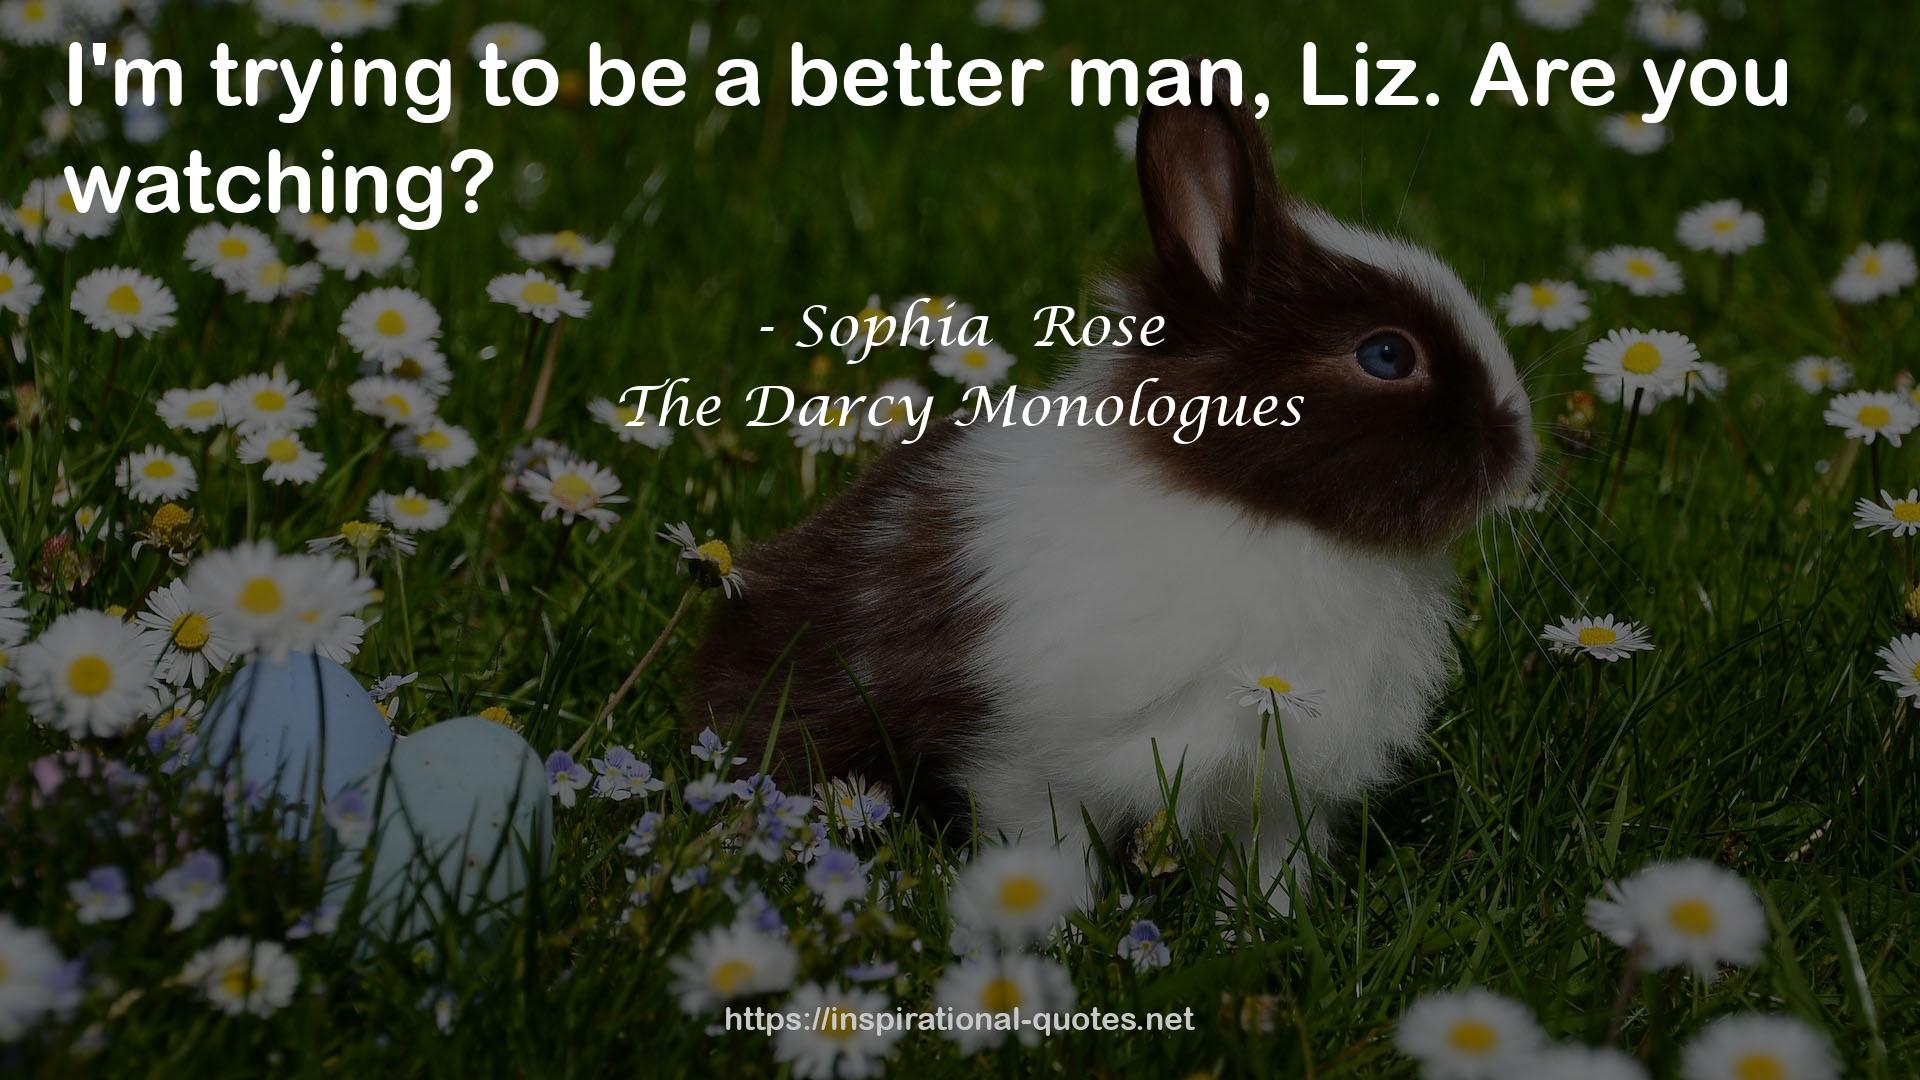 The Darcy Monologues QUOTES